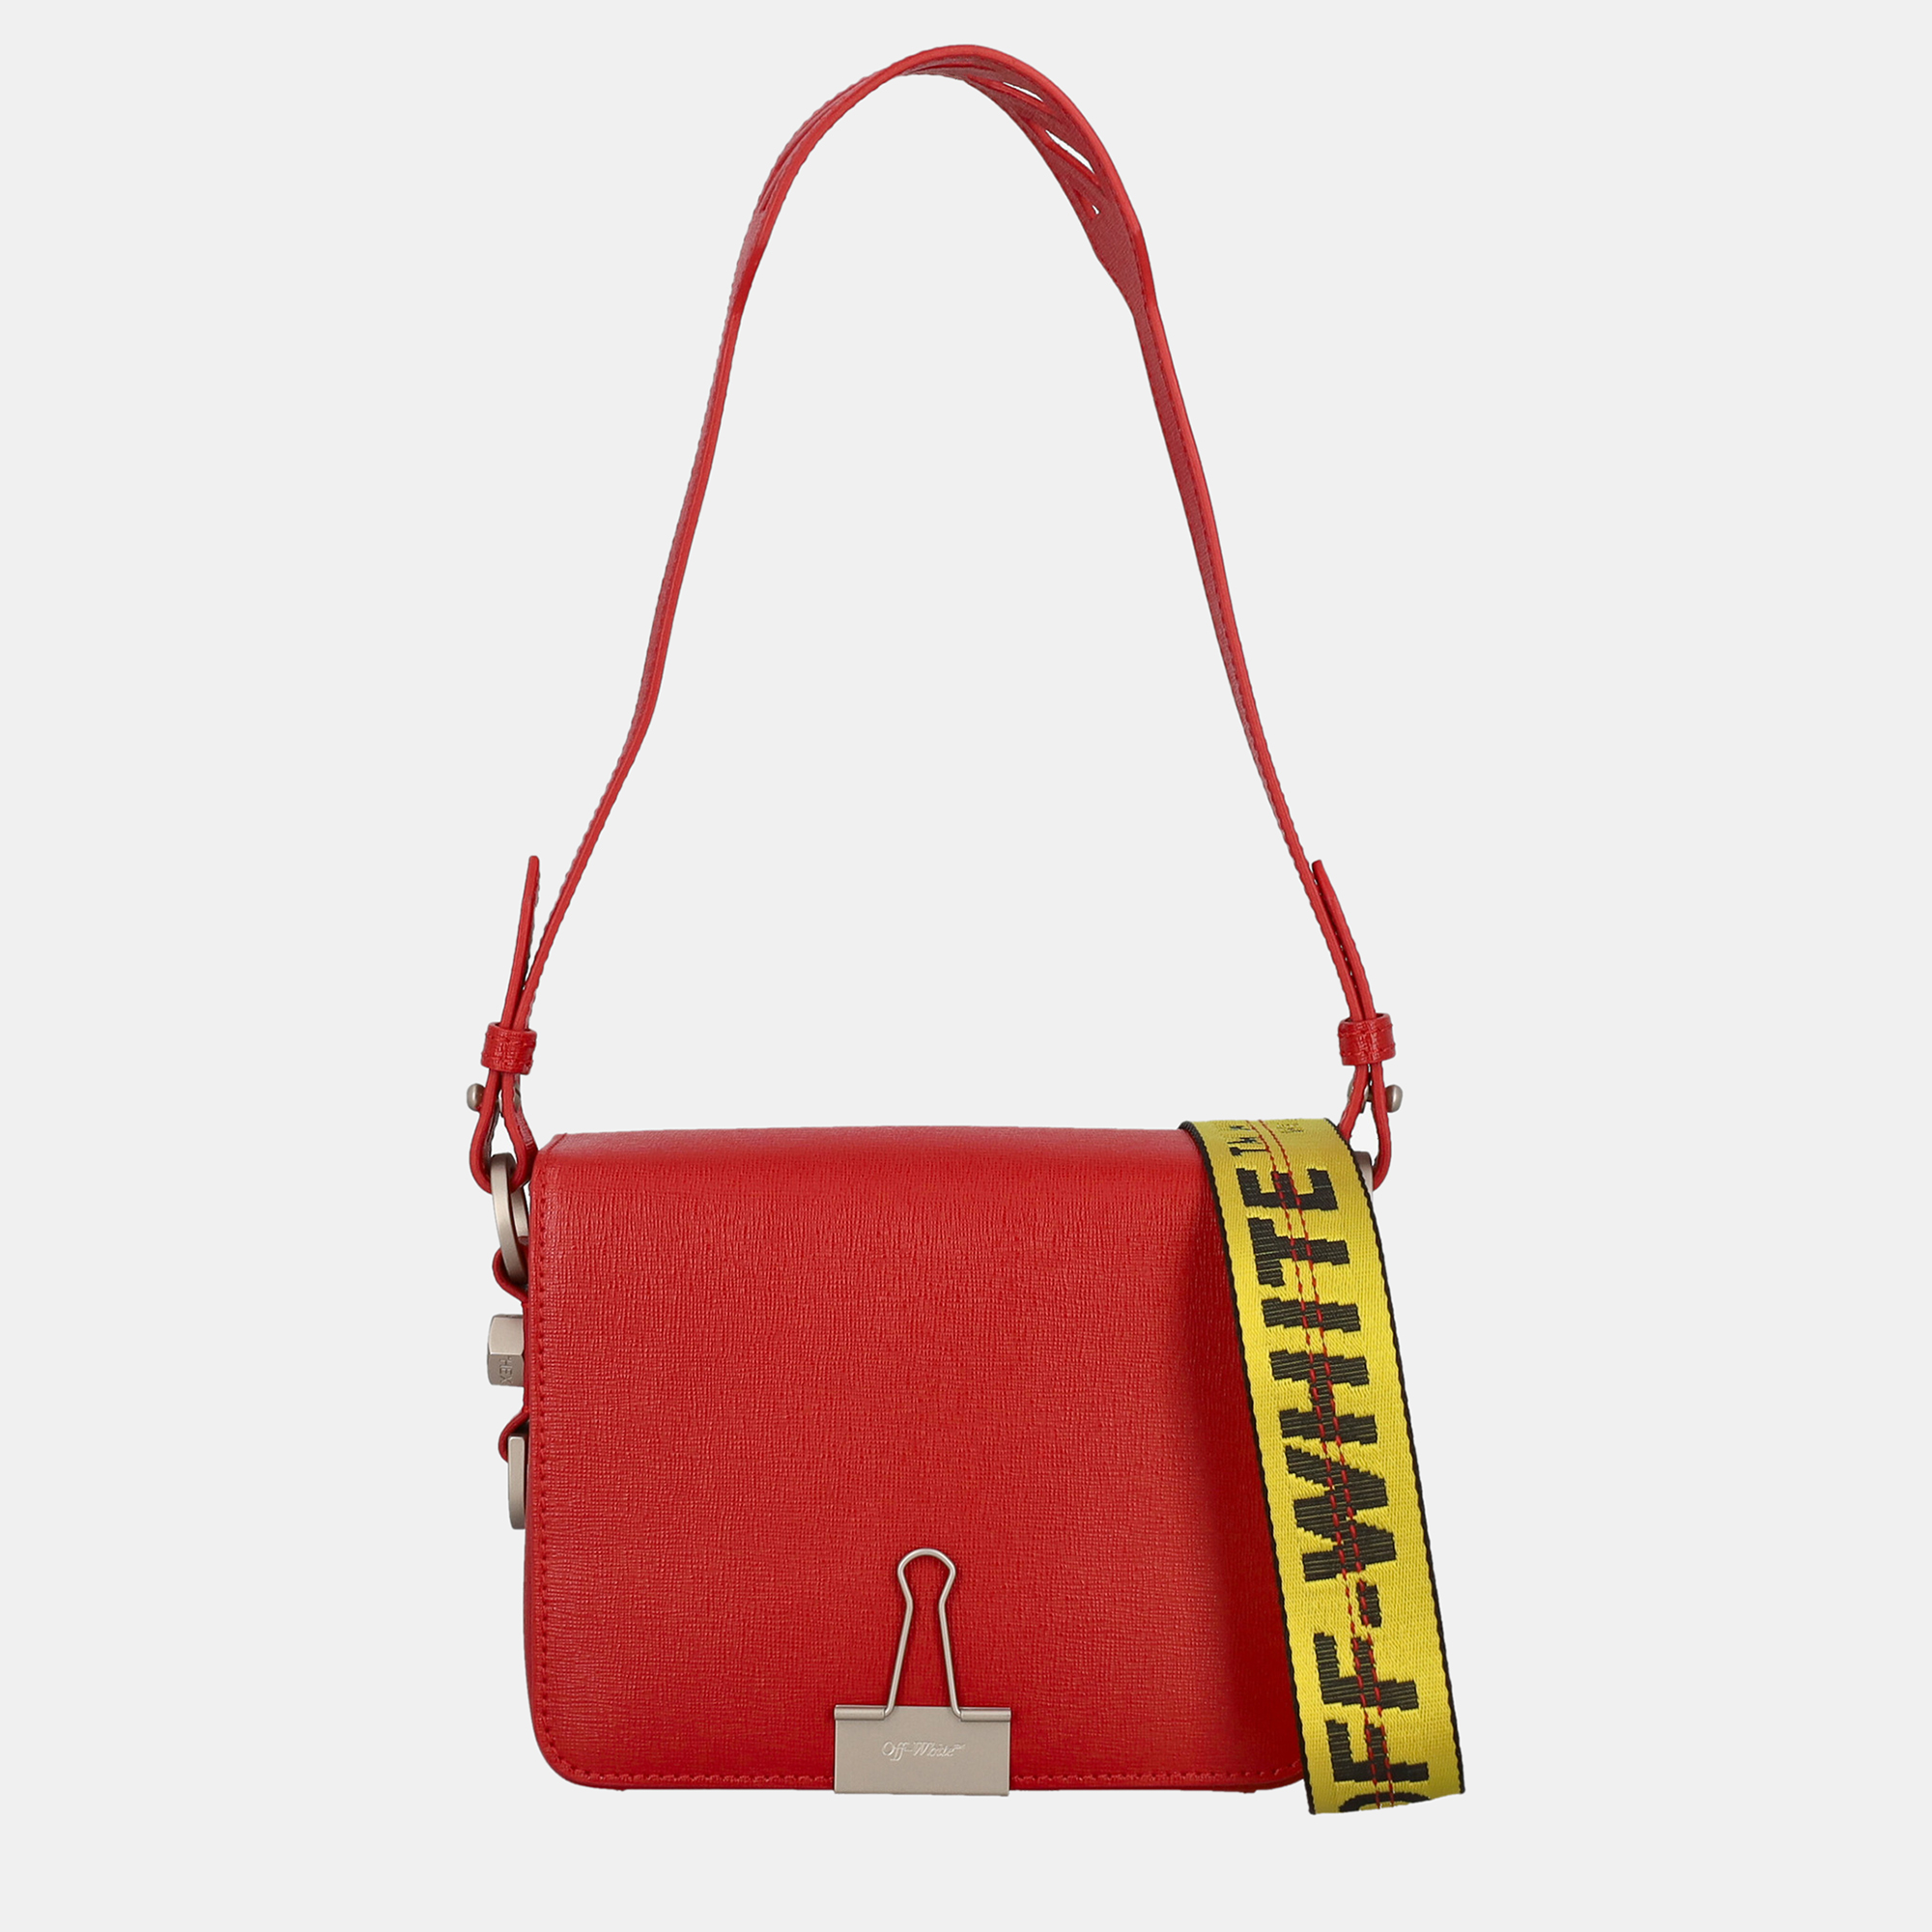 Off-White Women's Leather Cross Body Bag - Red - One Size